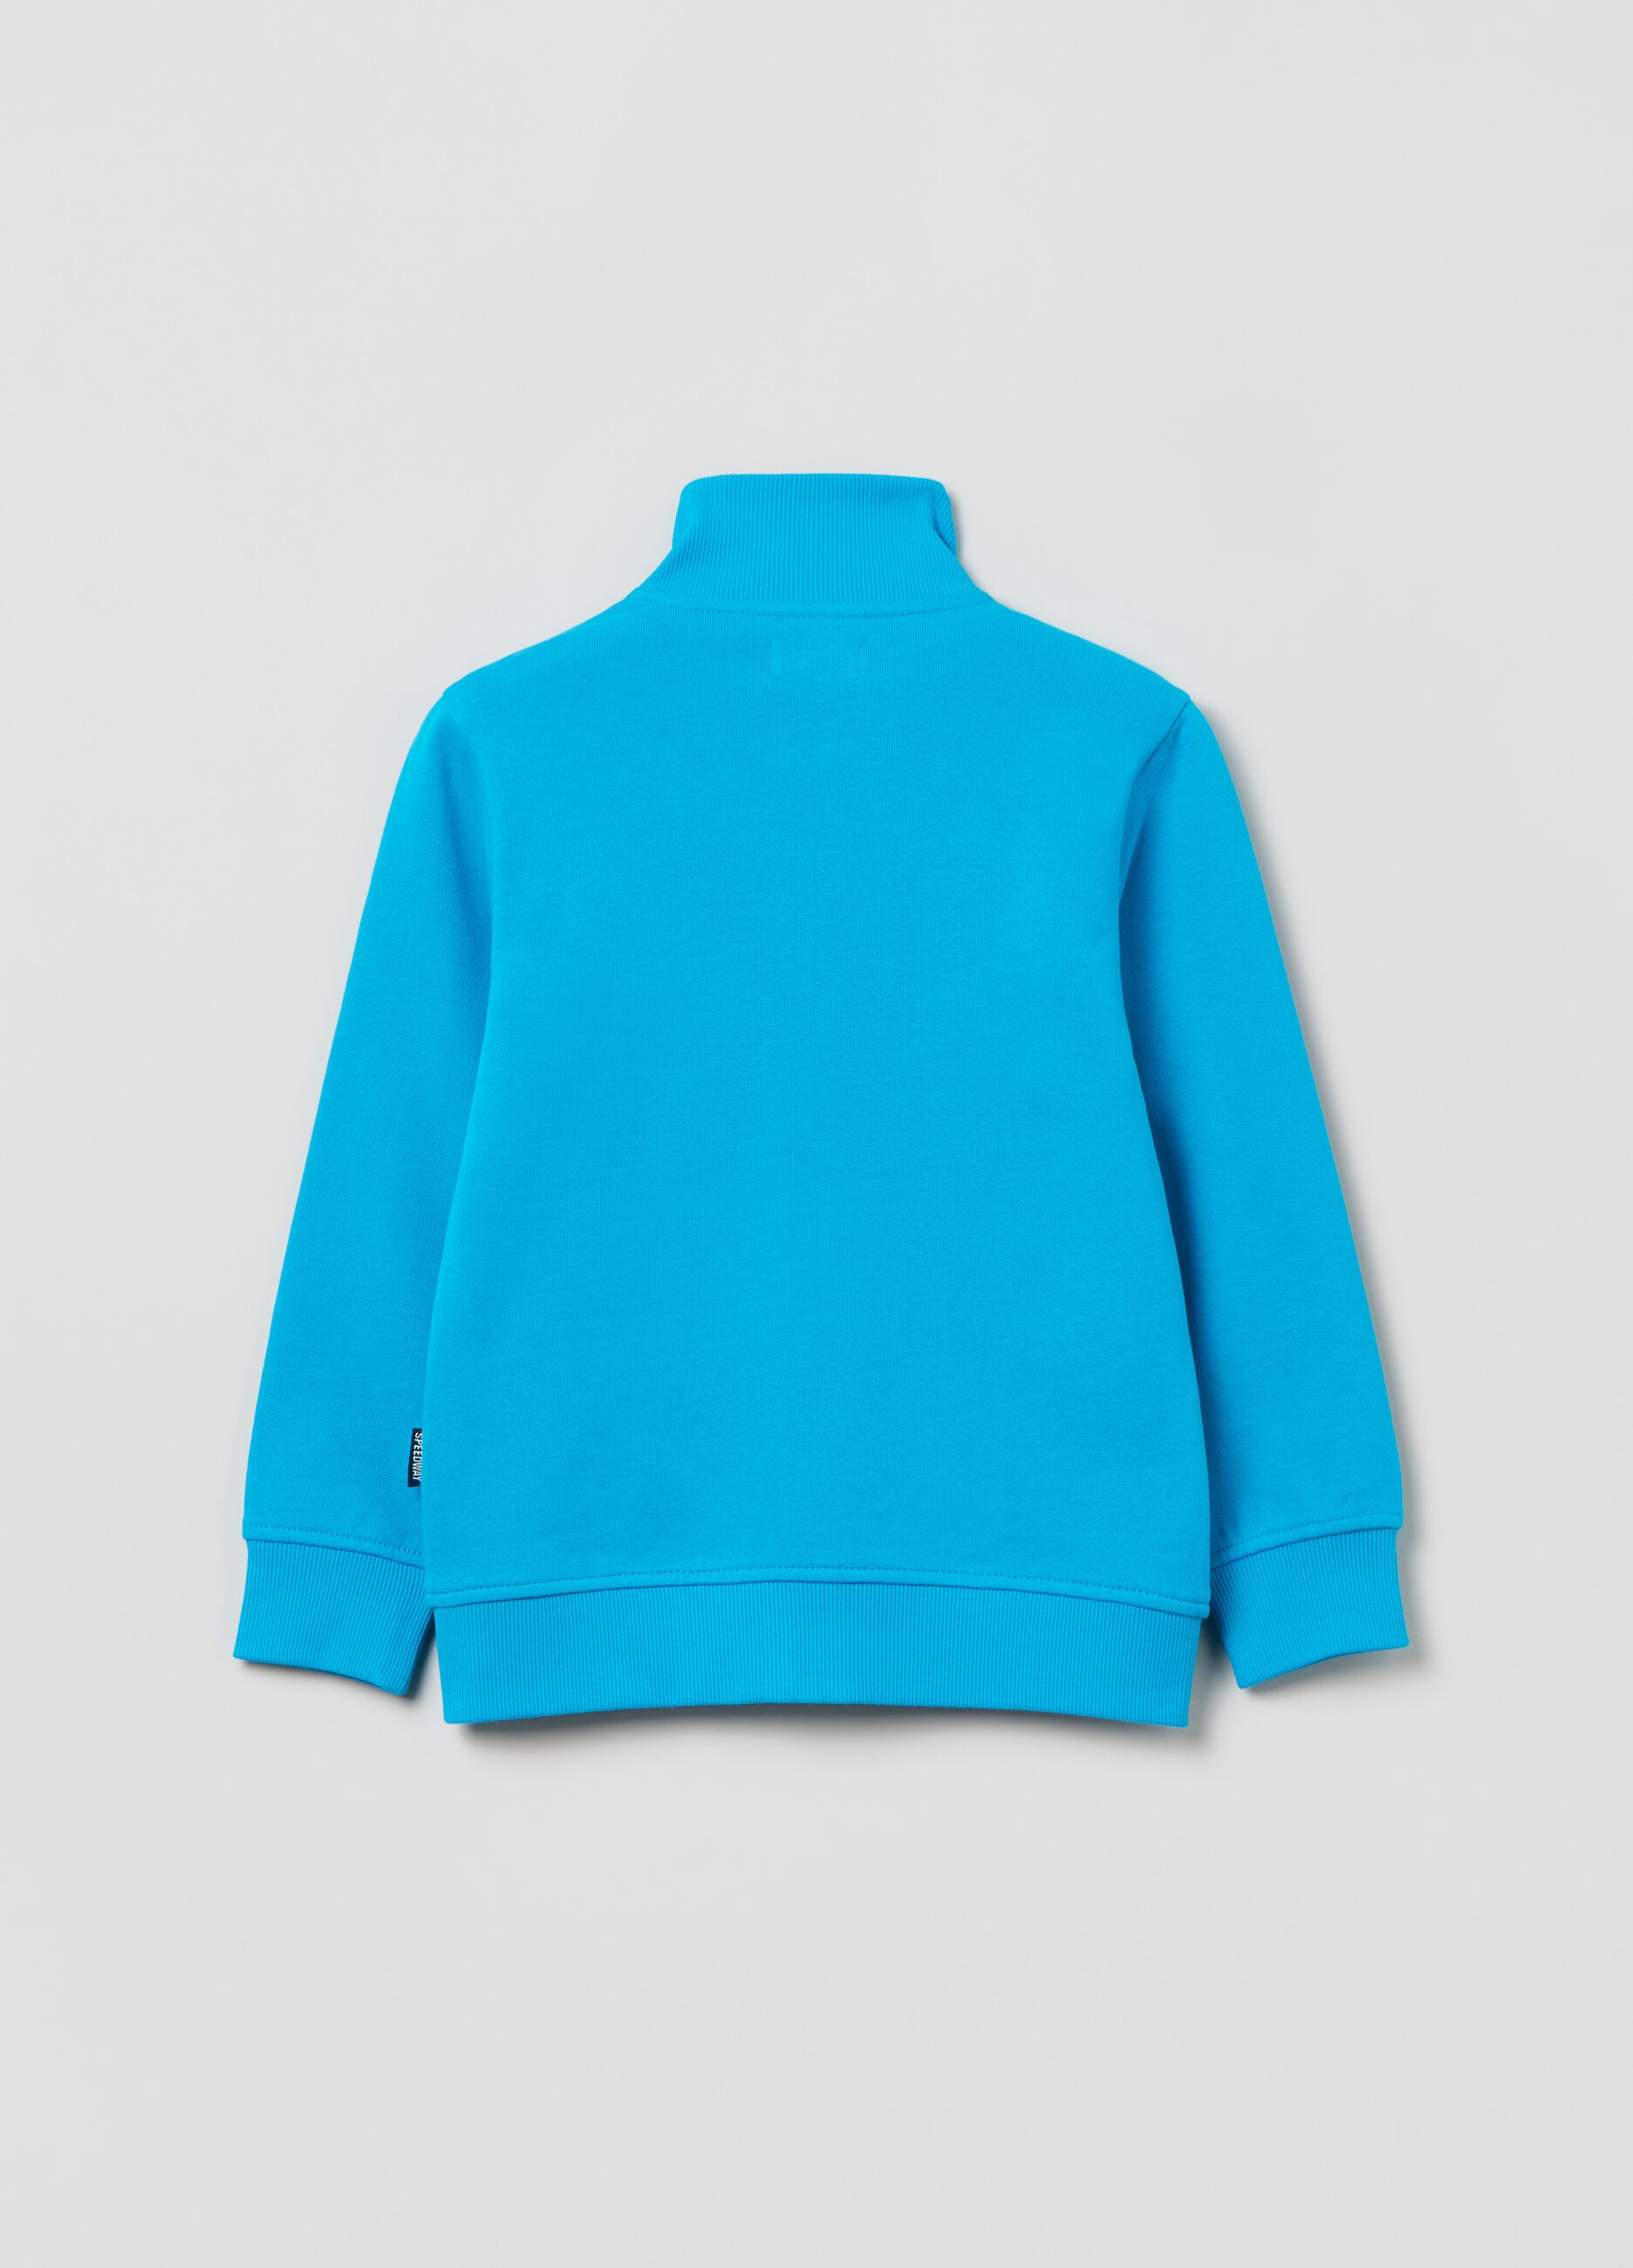 Full-zip plush top with high neck